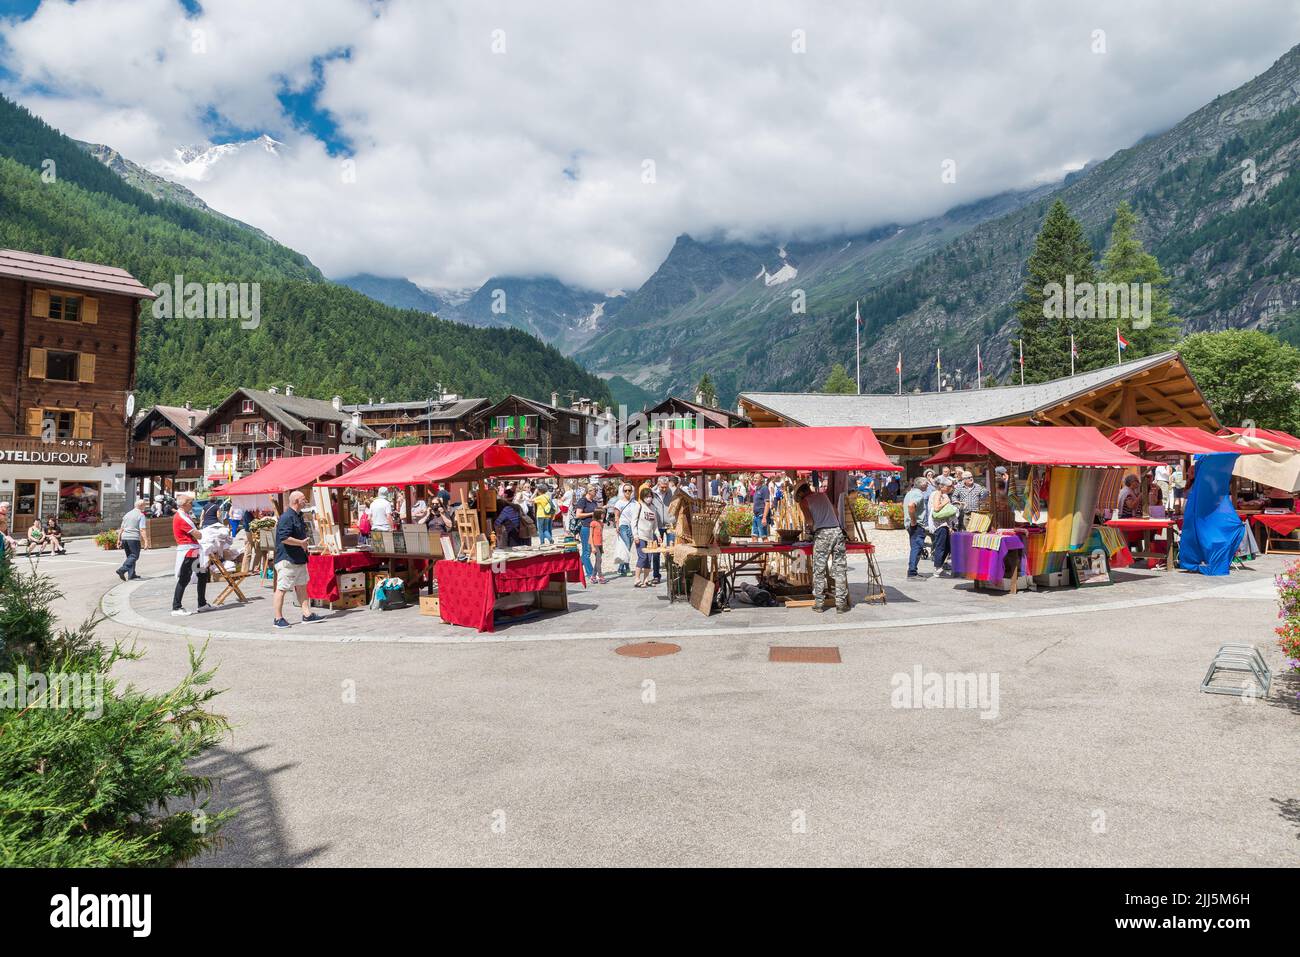 Mountain culture and tradition. San Bernardo fair, an important summer festival with stalls and alpine handicraft products Stock Photo